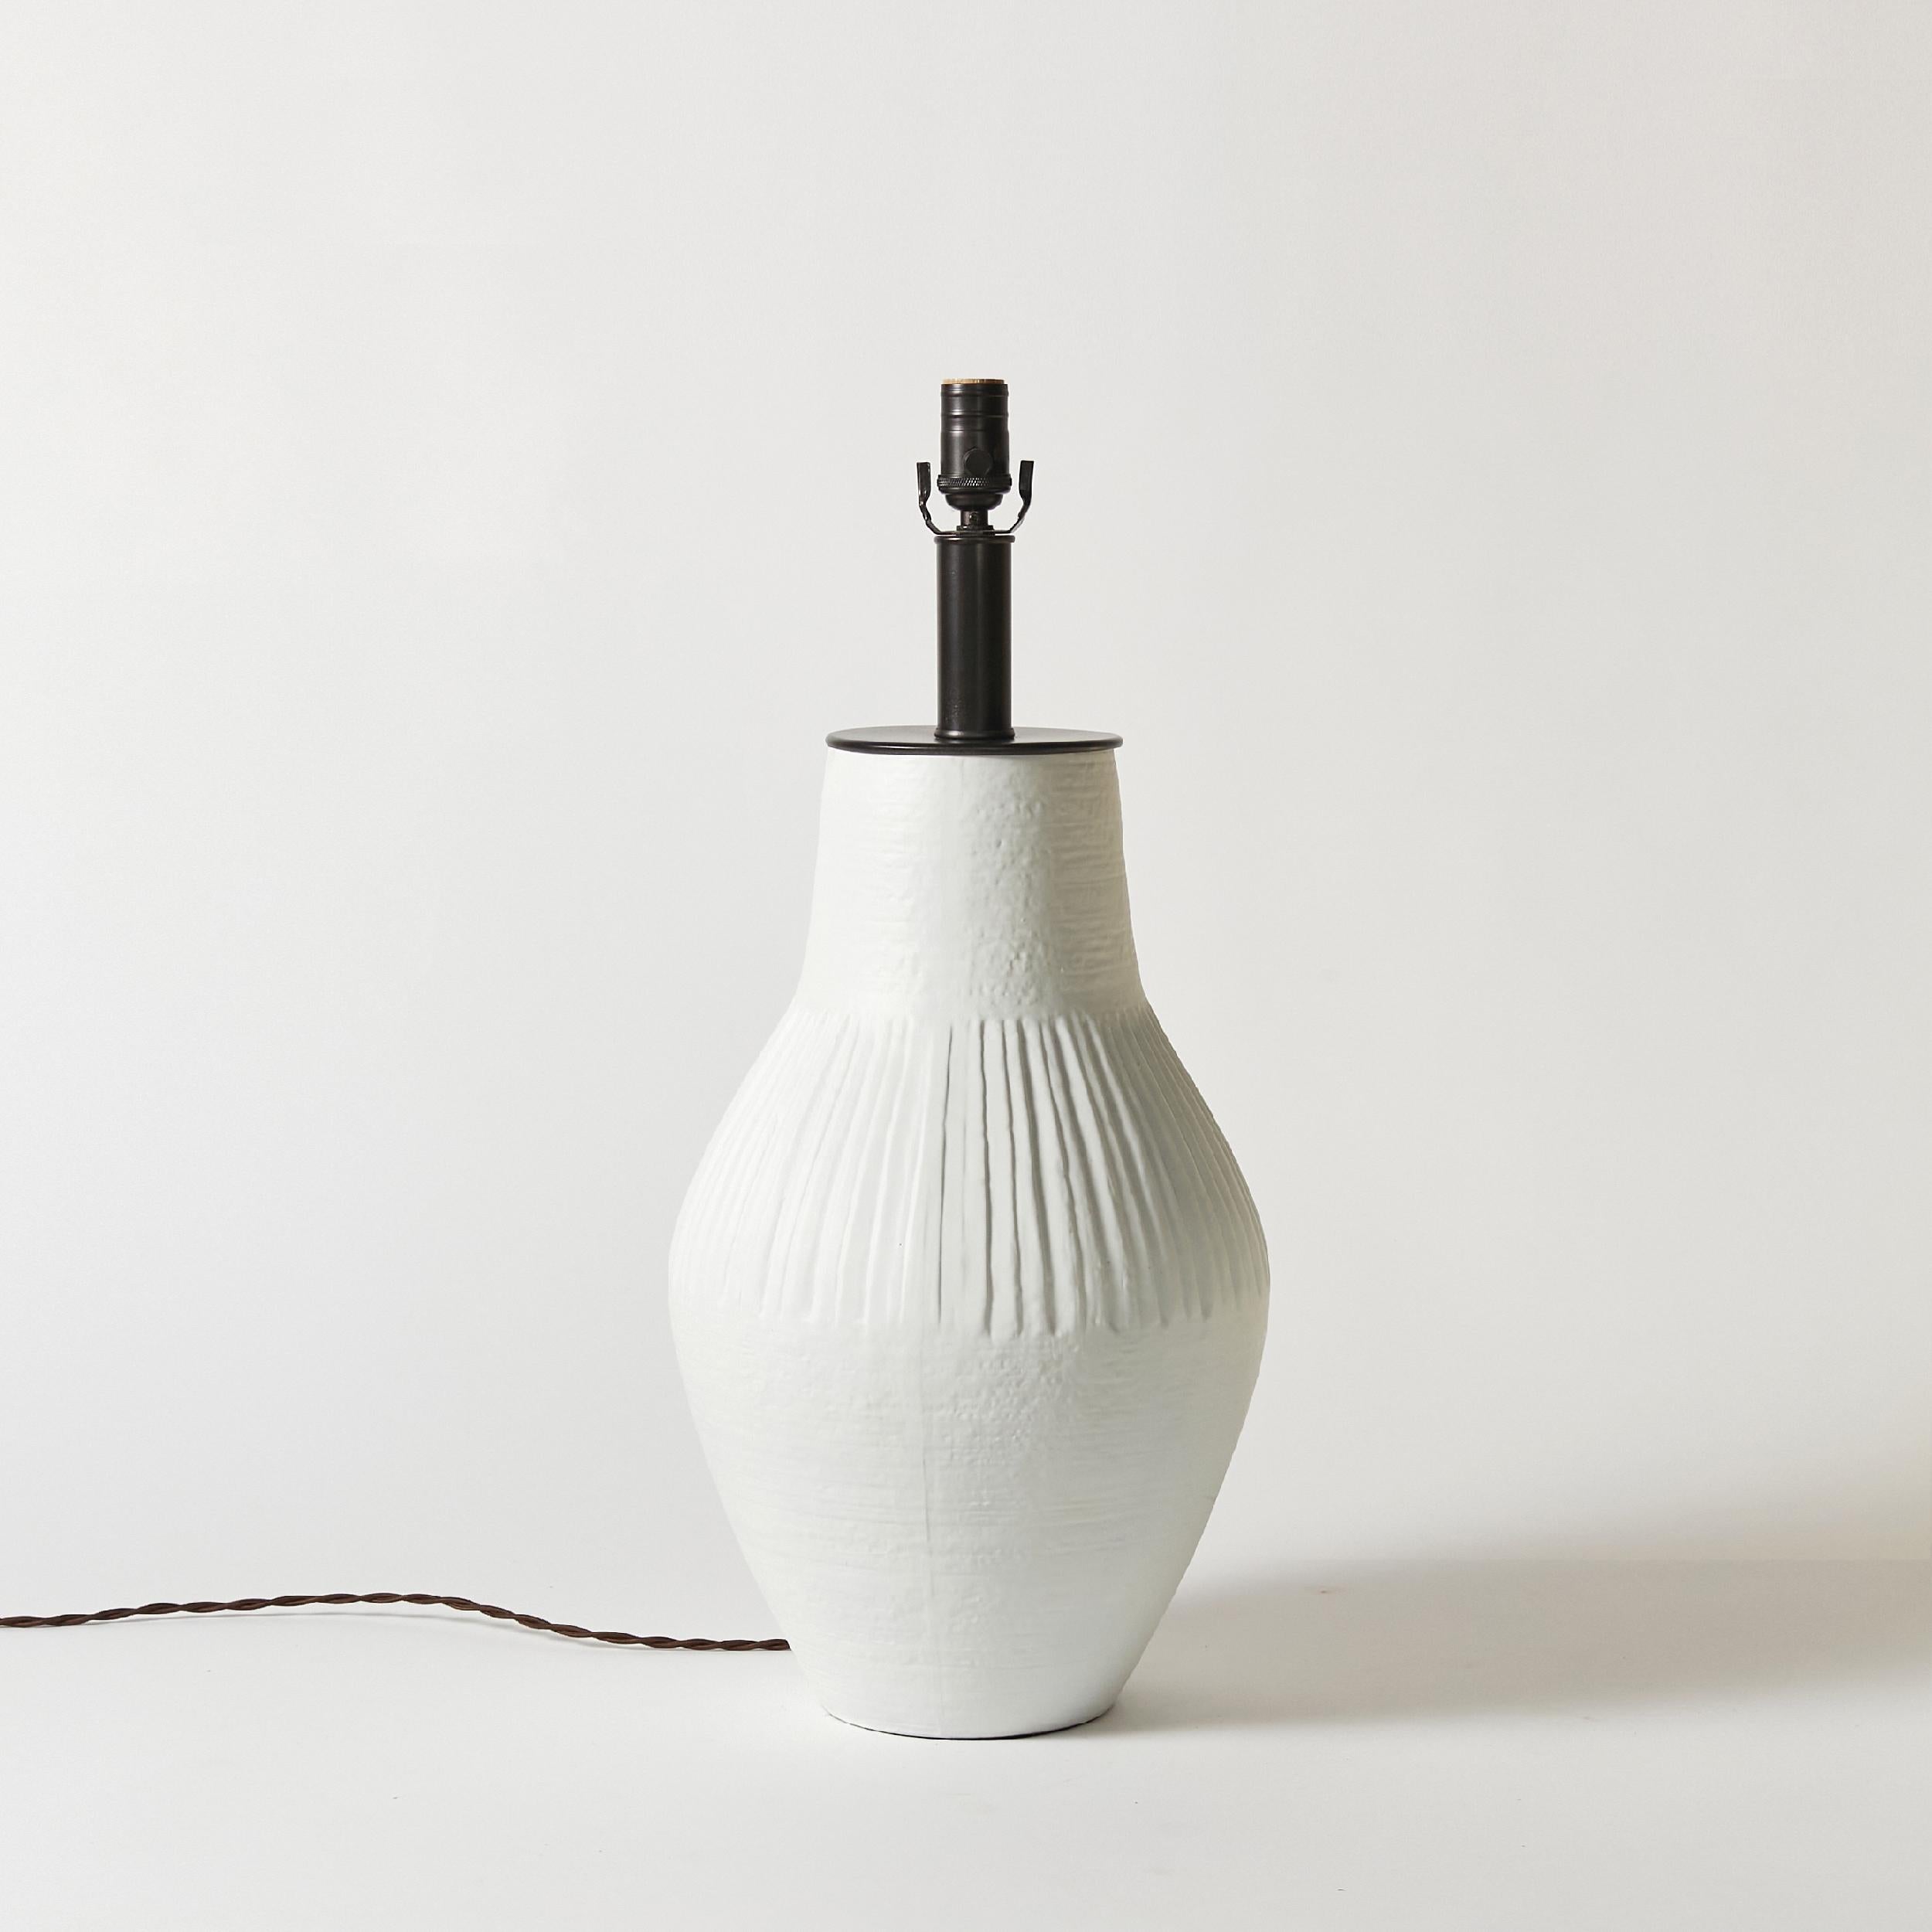 Midcentury west coast pottery table lamp finished in white gesso.
This item has been rewired with new hardware and braided cloth cord. This lamp does not include shade or harp.